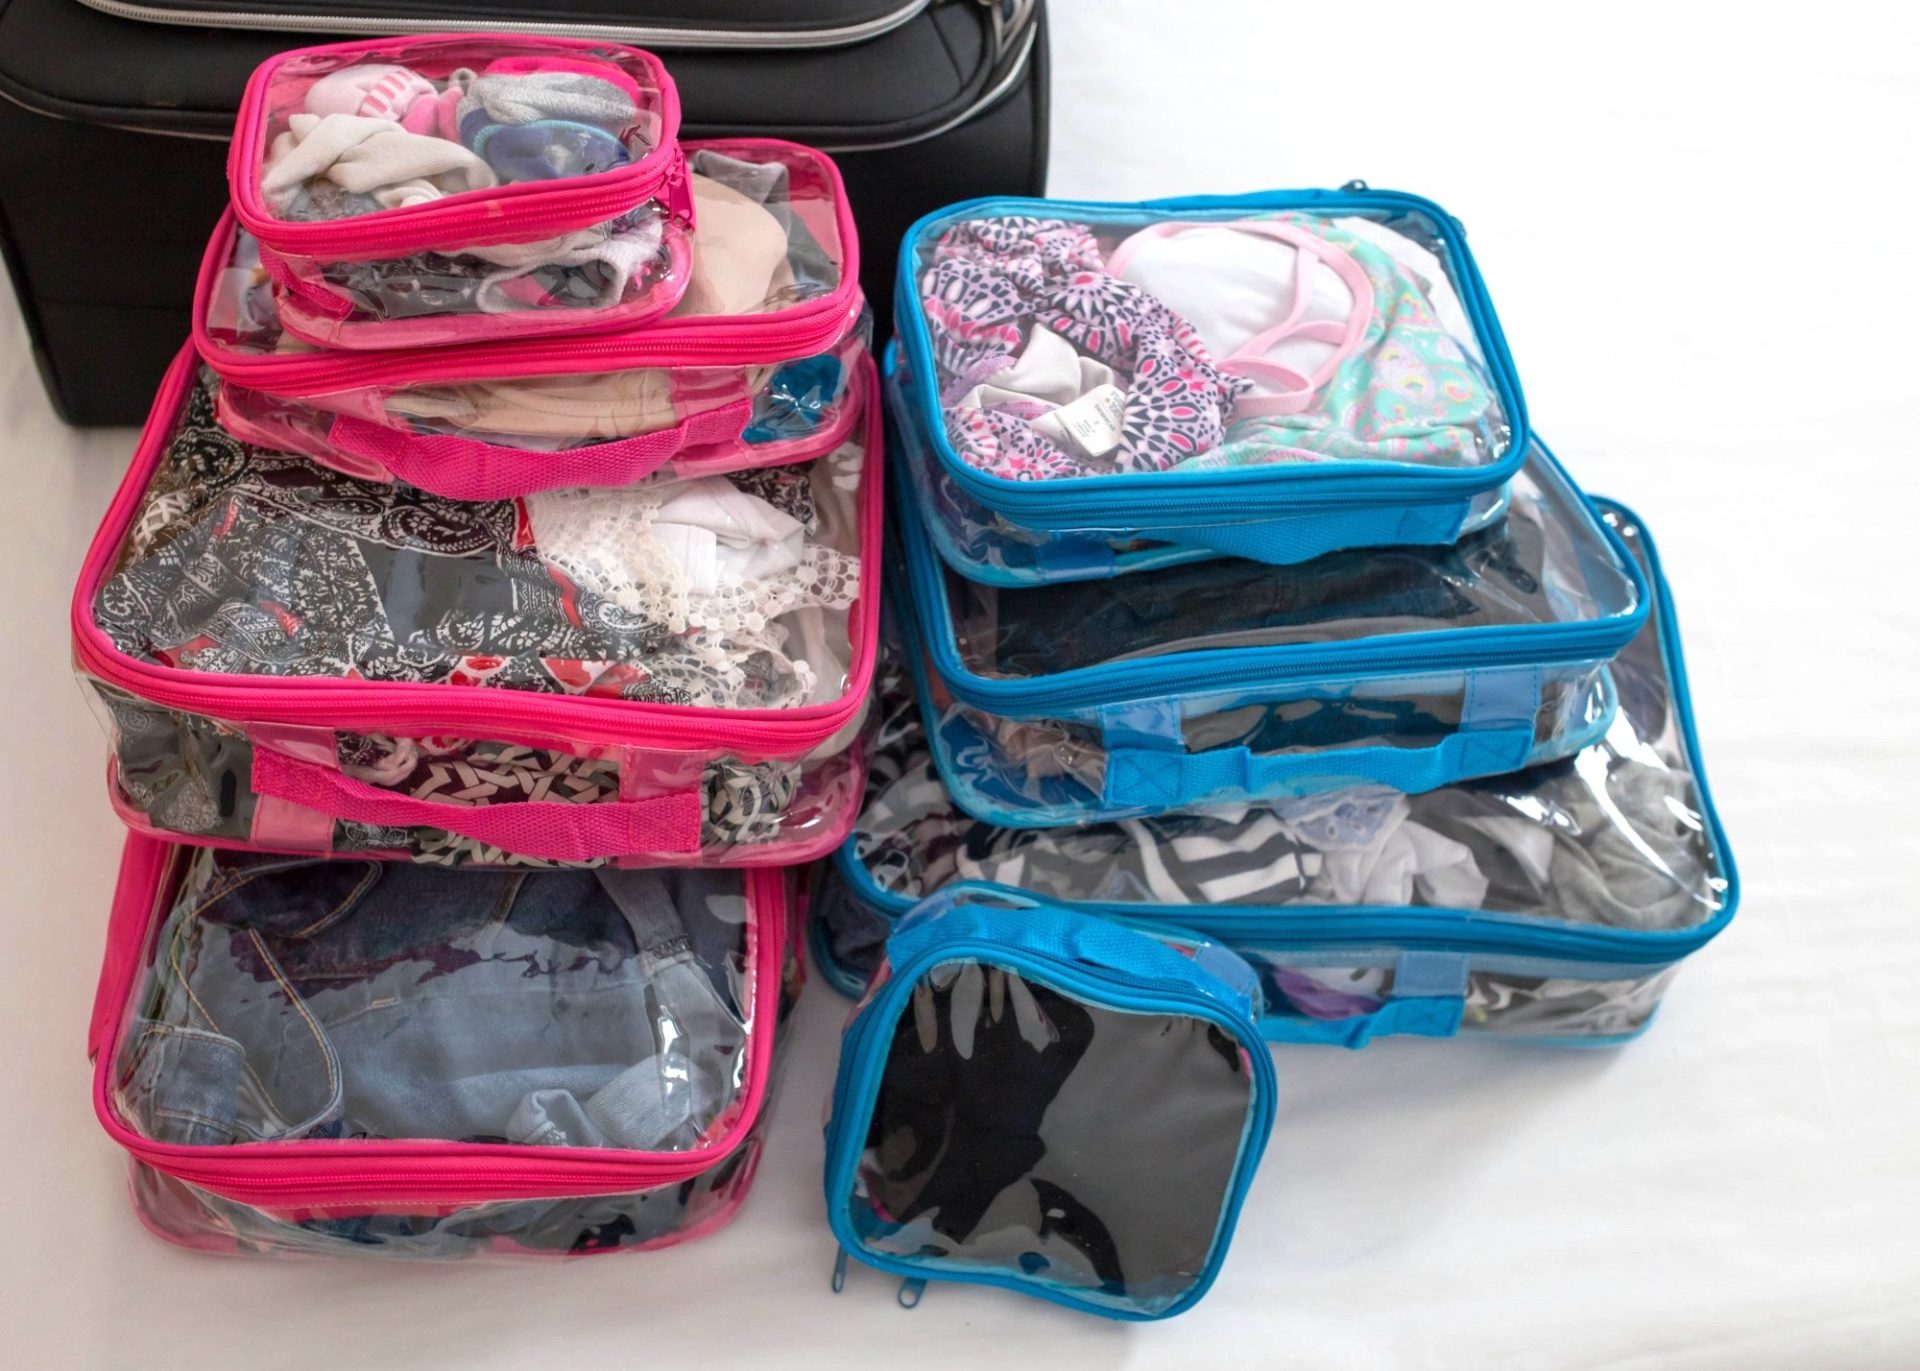 Pink and blue starter set packing cubes